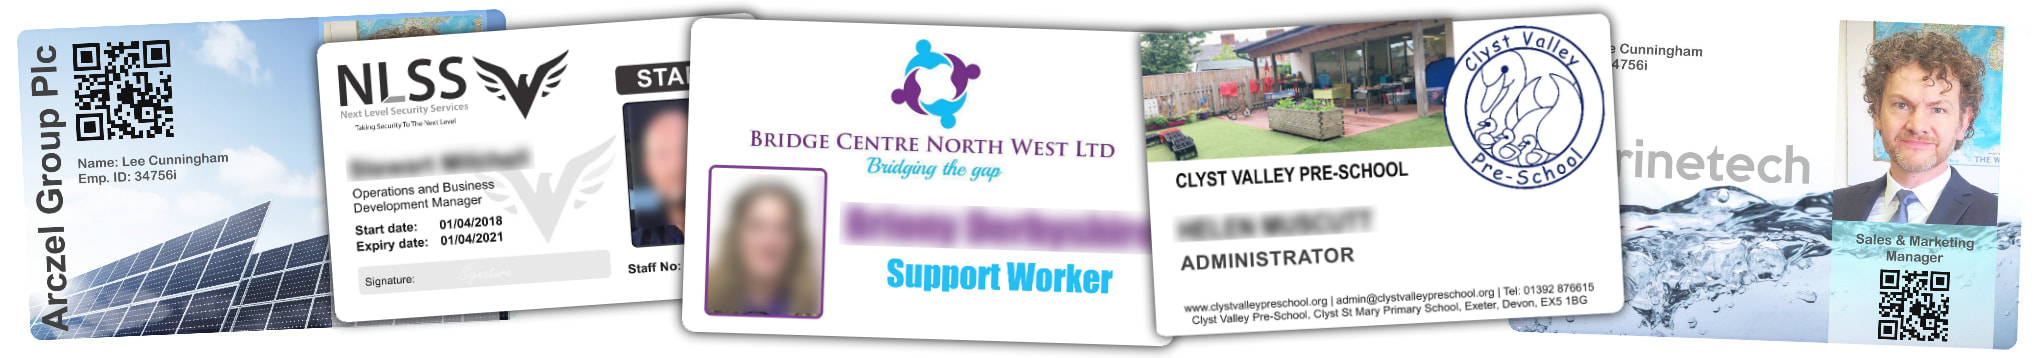 Oldham examples of staff photo ID cards | samples of employee Identity card printing | Workers ID cards printed in 